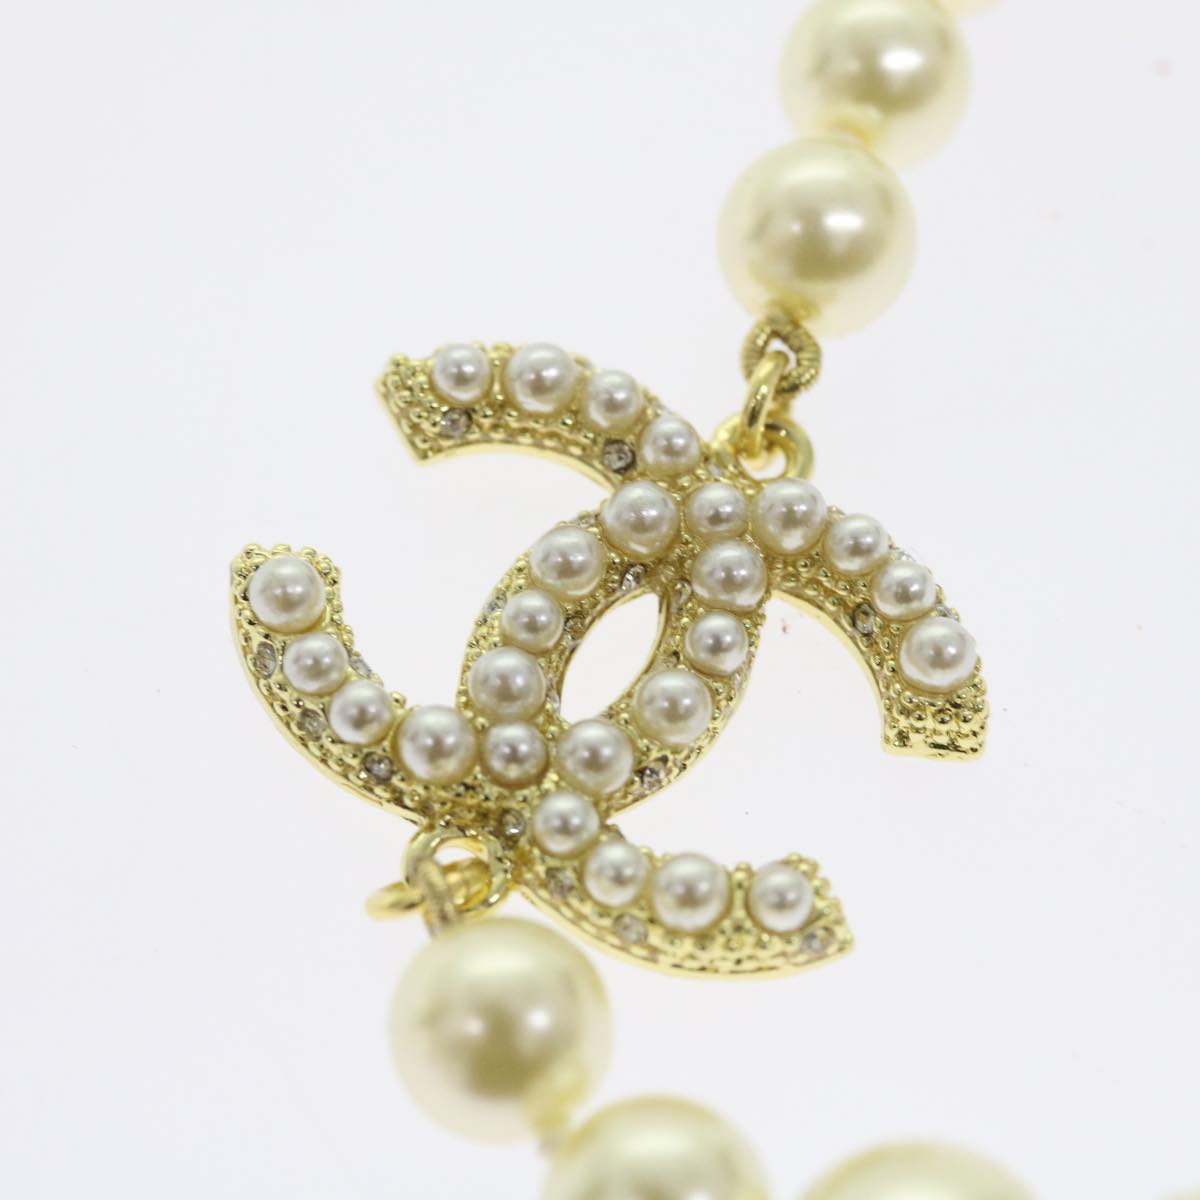 CHANEL Pearl Necklace Metal White Gold Tone CC Auth 56729A